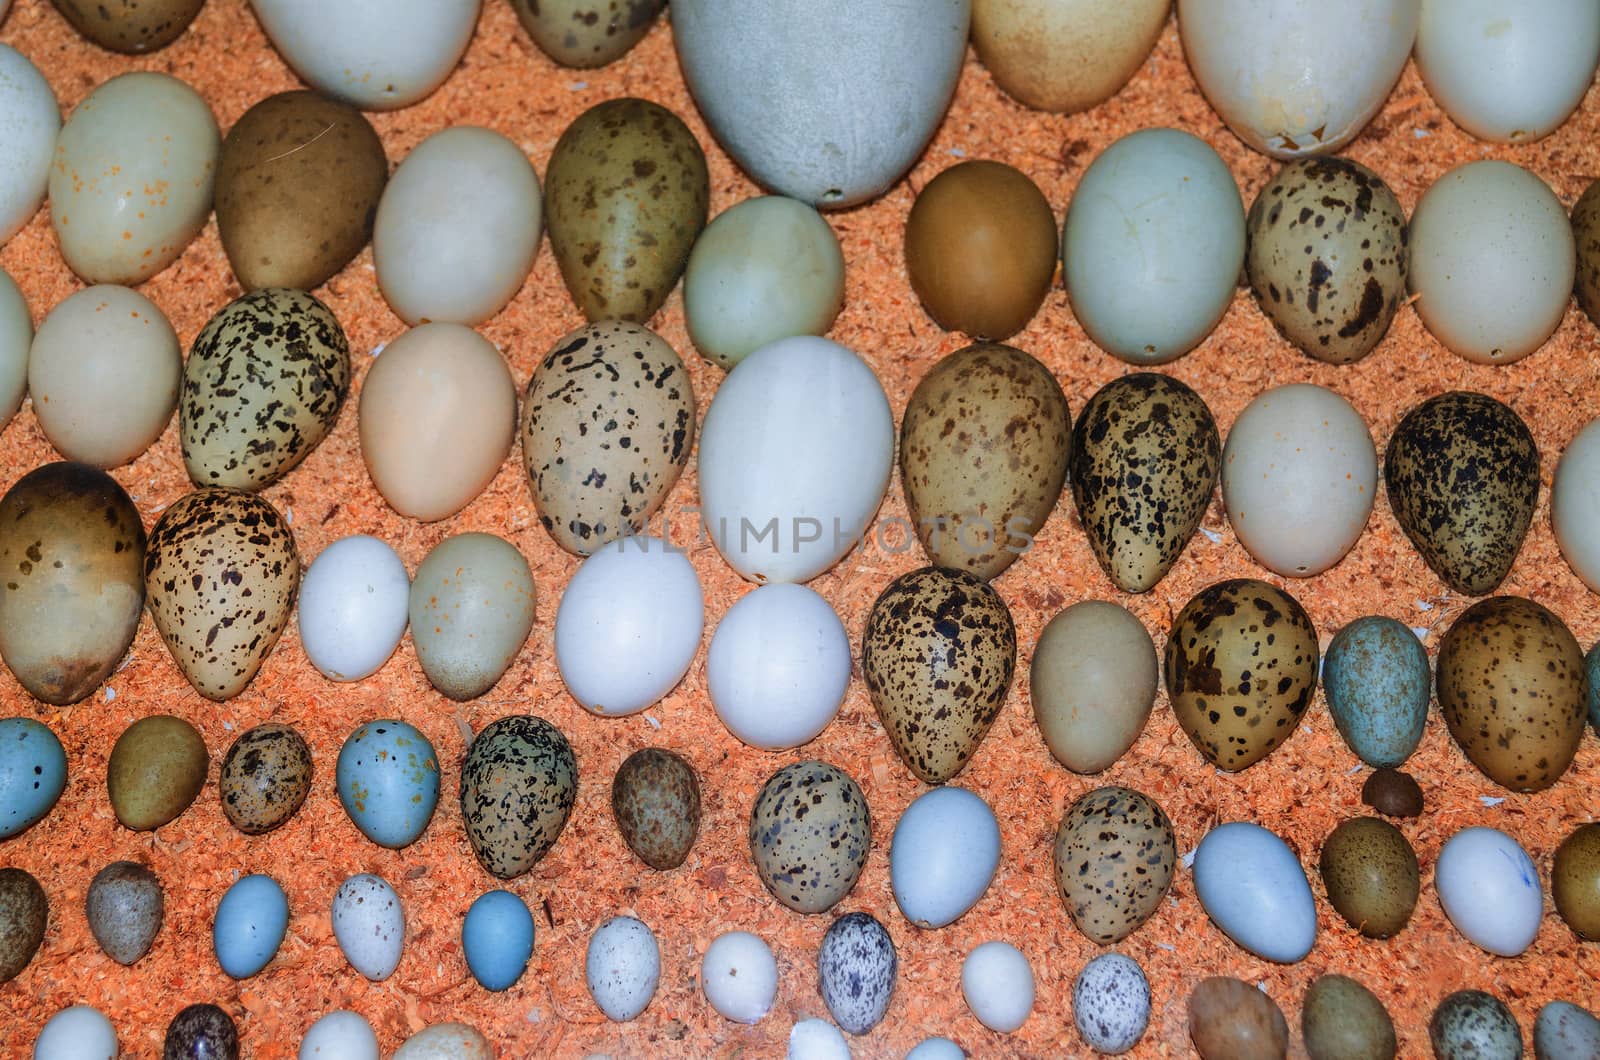 Collection of various birds' eggs by JFsPic